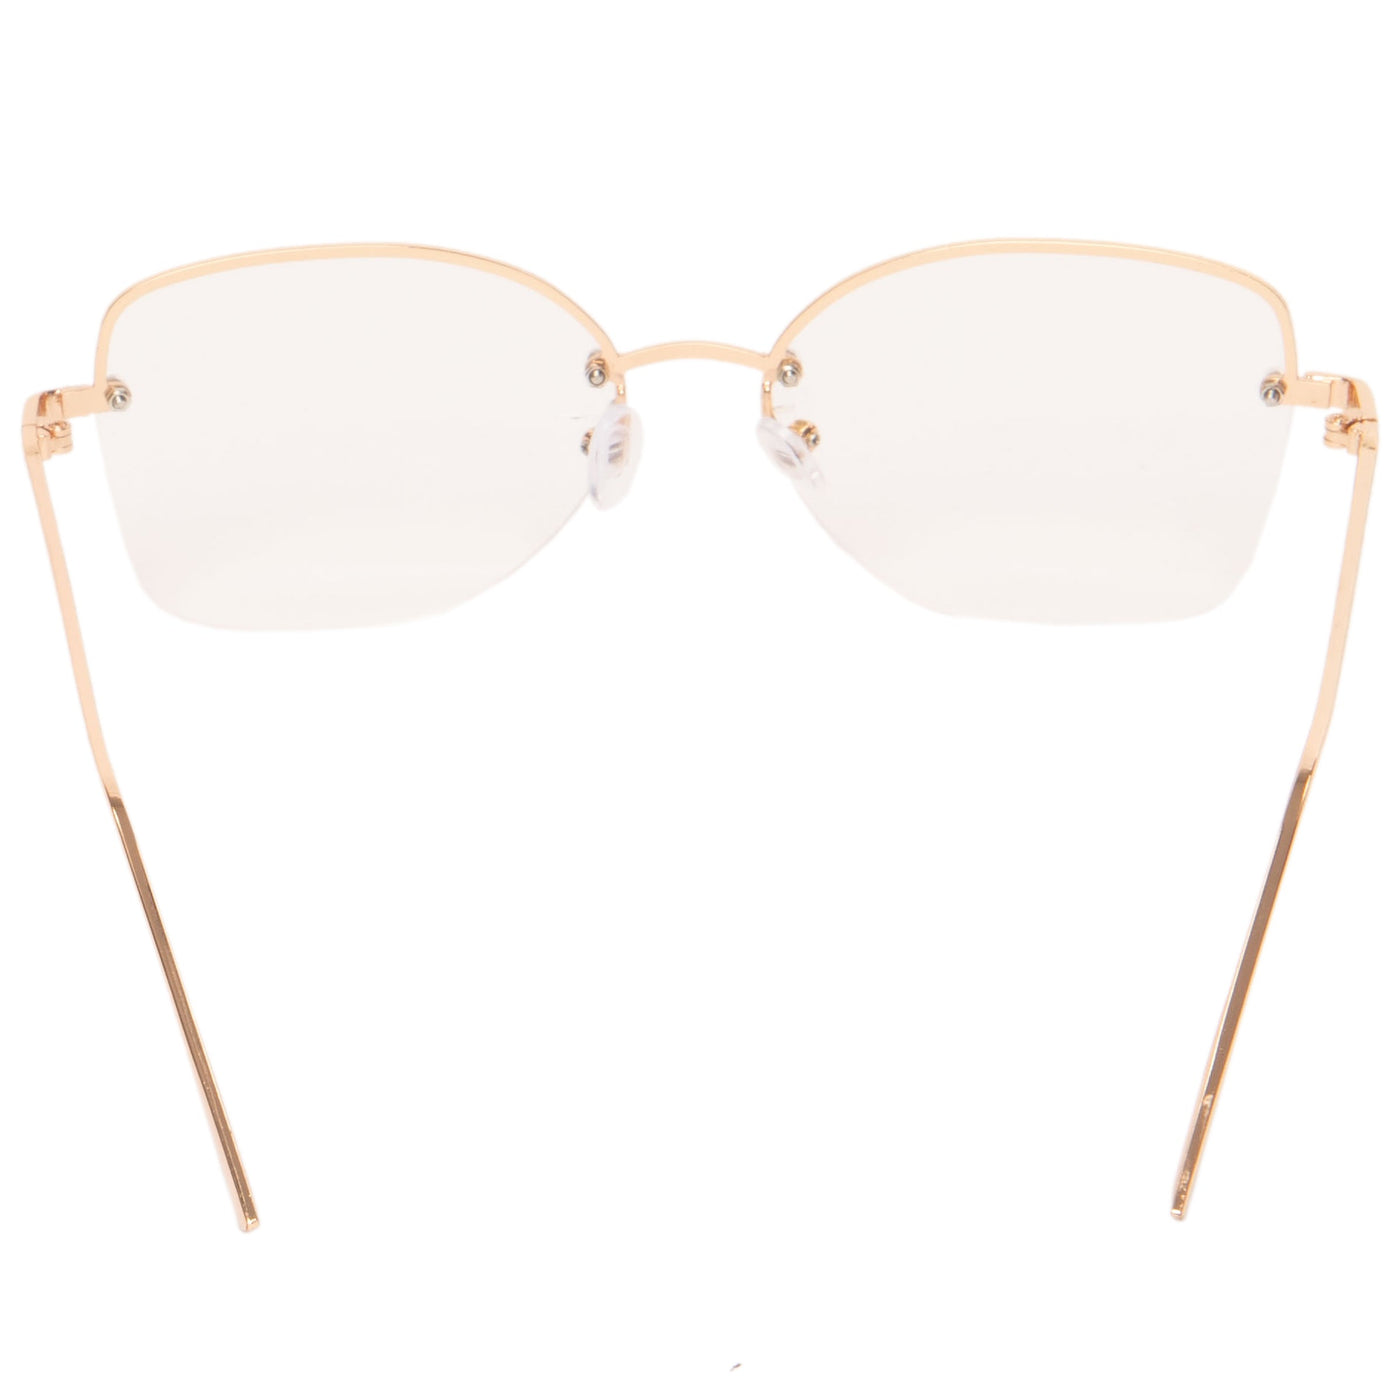 GLASSES - Womens Metal Frame, Curved Brow Readers